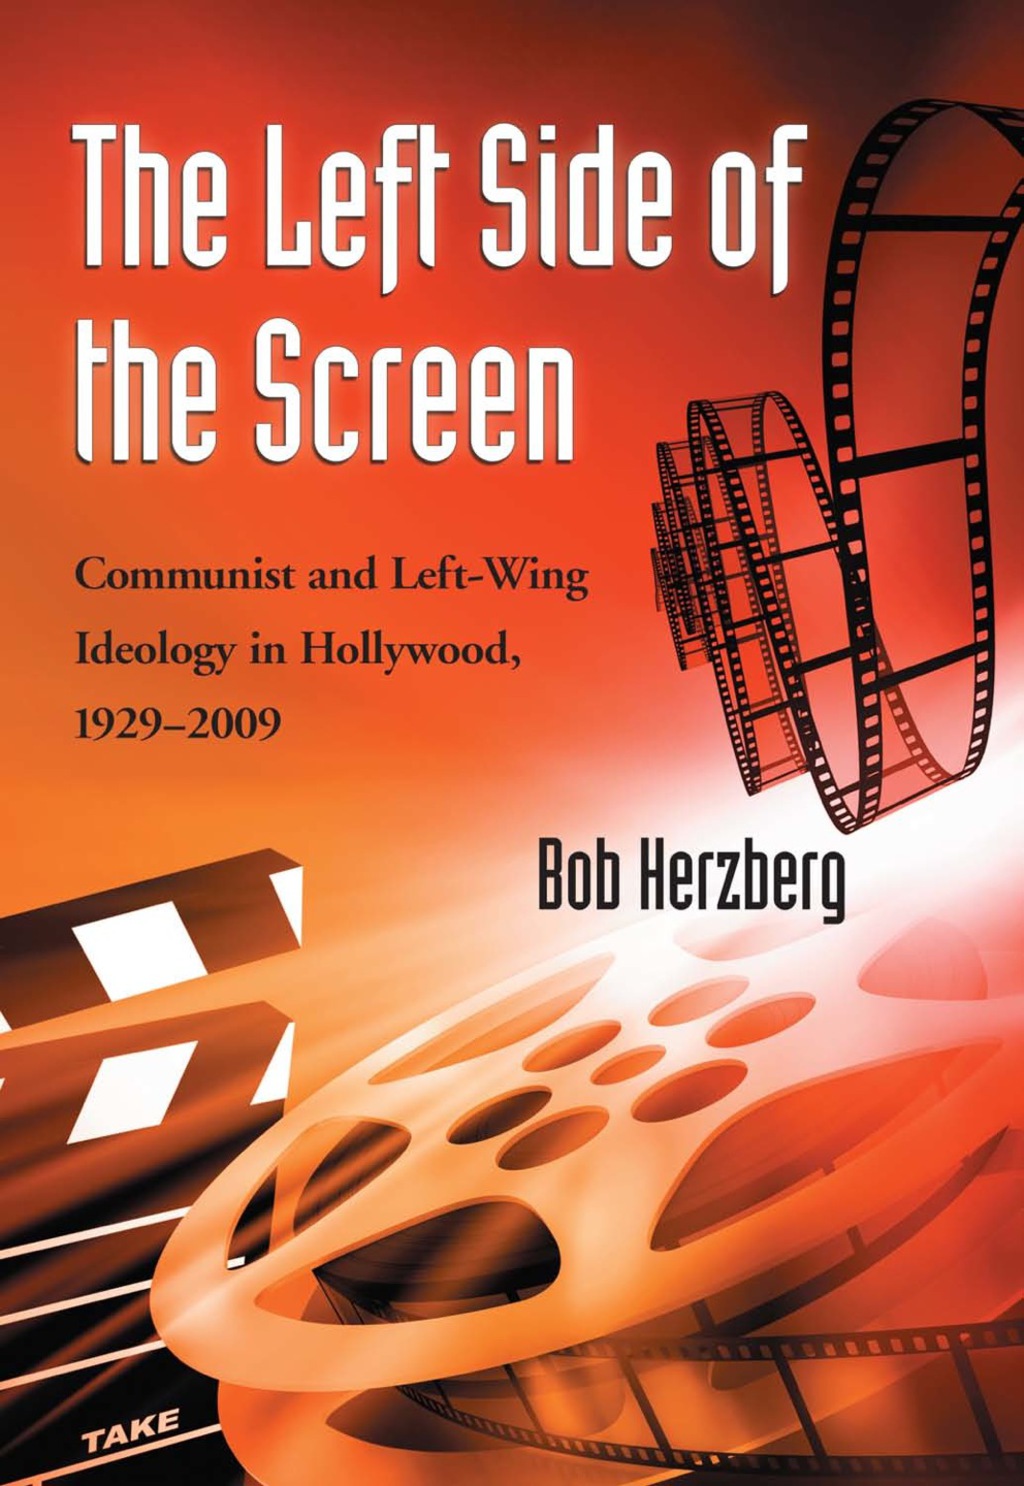 The Left Side of the Screen: Communist and Left-Wing Ideology in Hollywood  1929-2009 (eBook) - Bob Herzberg,